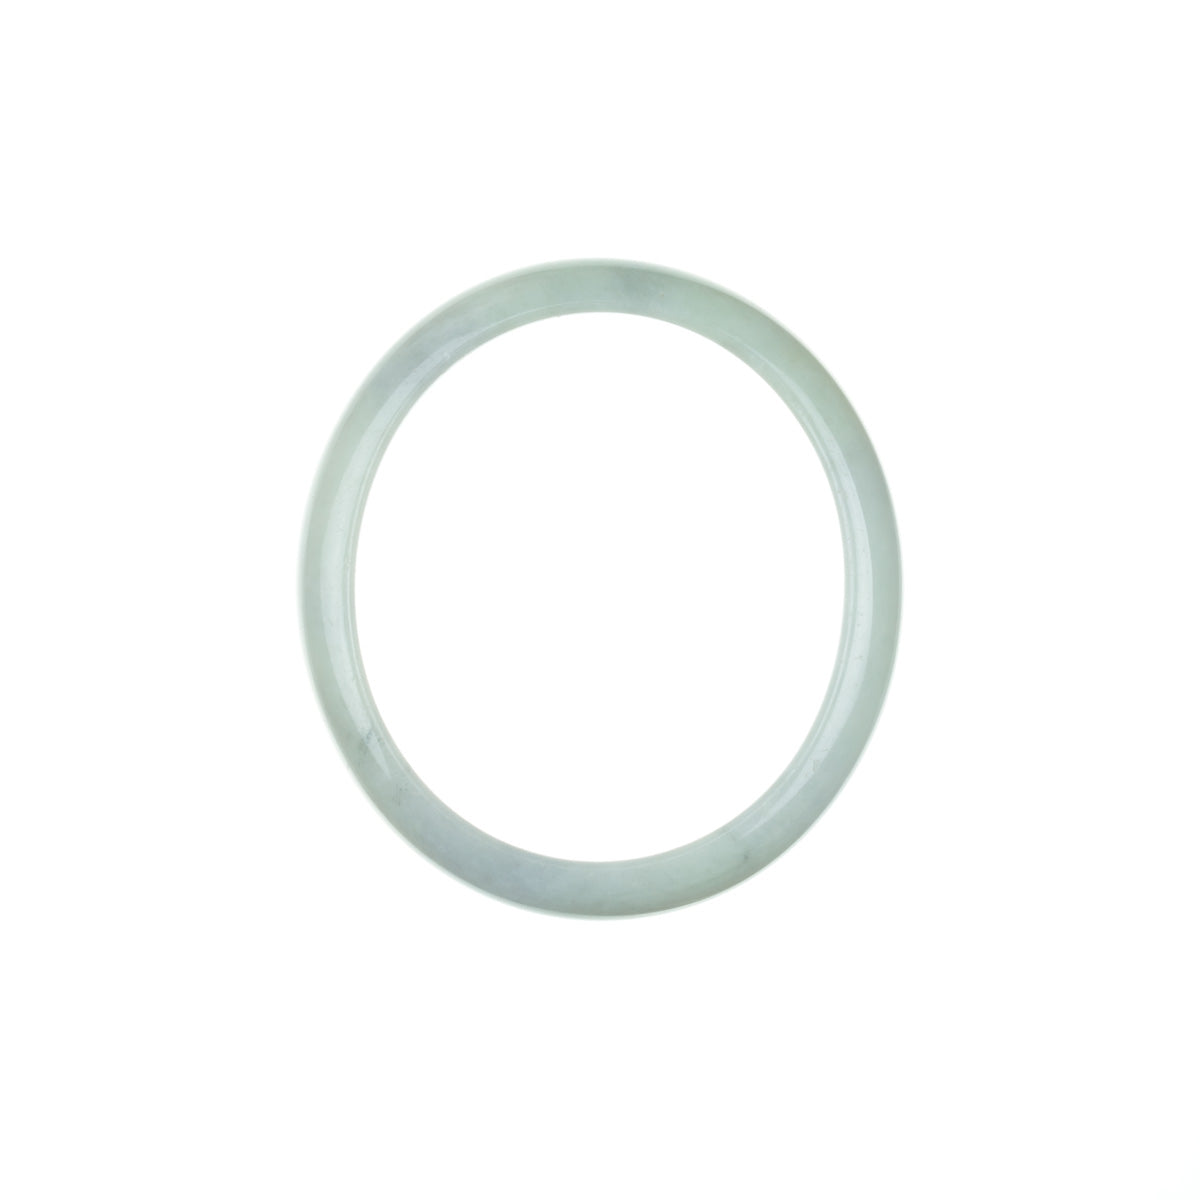 Real Grade A Pale Green with hints of Lavender Jade Bangle Bracelet - 56mm Oval